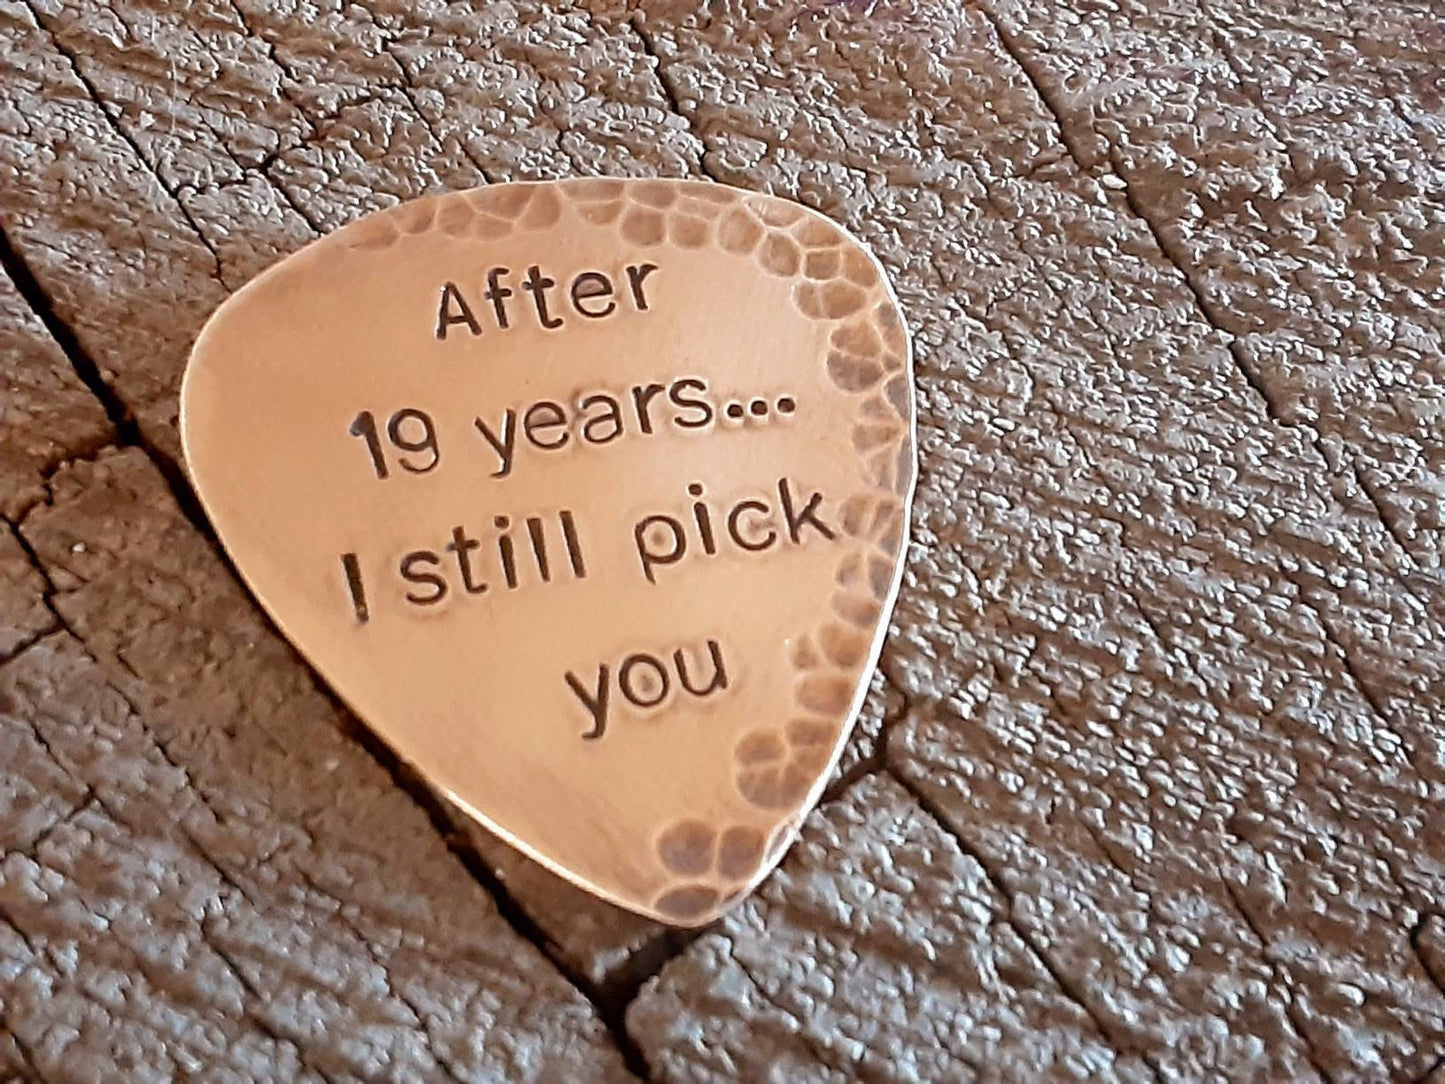 Bronze guitar pick with distressed rustic finishes